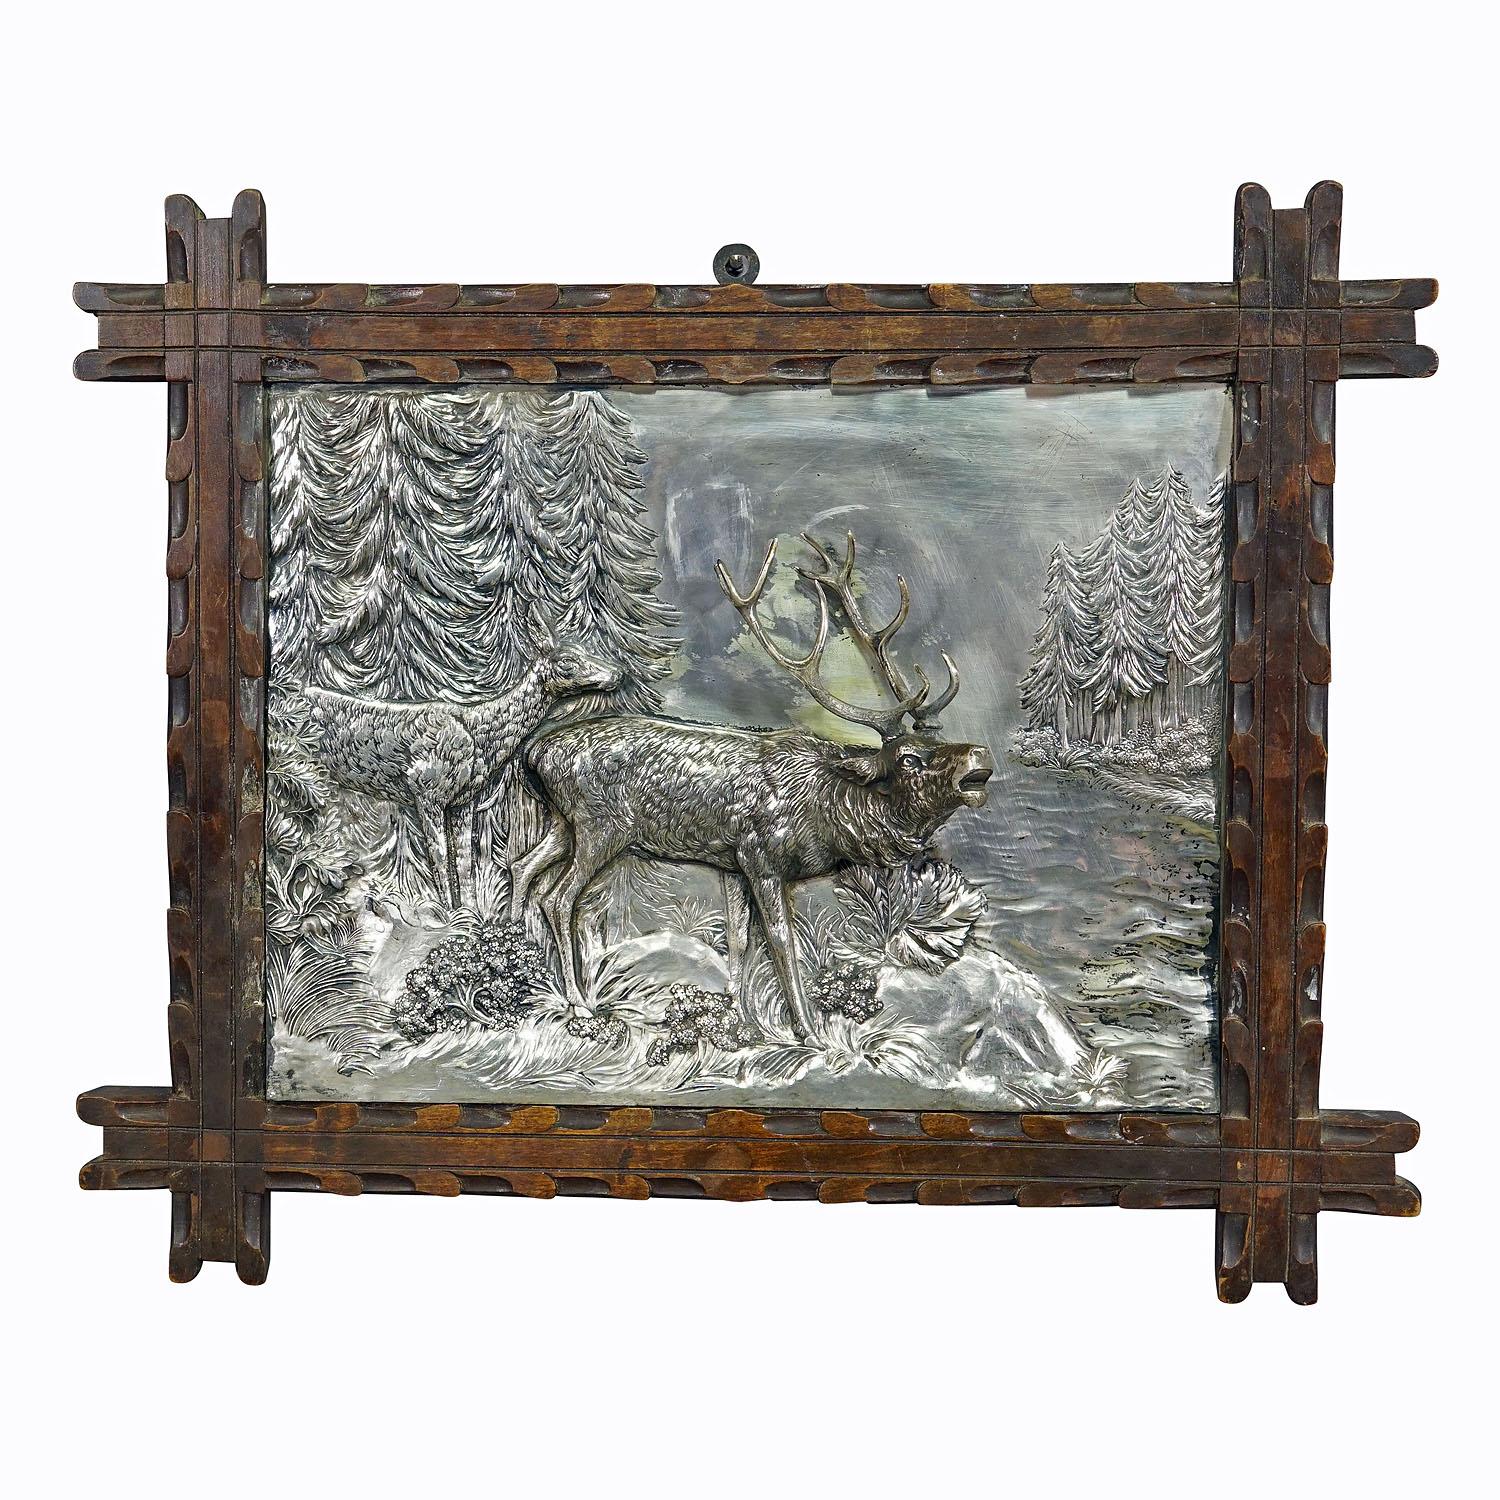 Antique Silvered Metal Relief Featuring a Stag and a Doe

Rare silvered metal relief from the end of the 19th century representing a majestic deer and doe standing at the edge of the forest. The subject (deers and trees) is a 3-dimensional silver